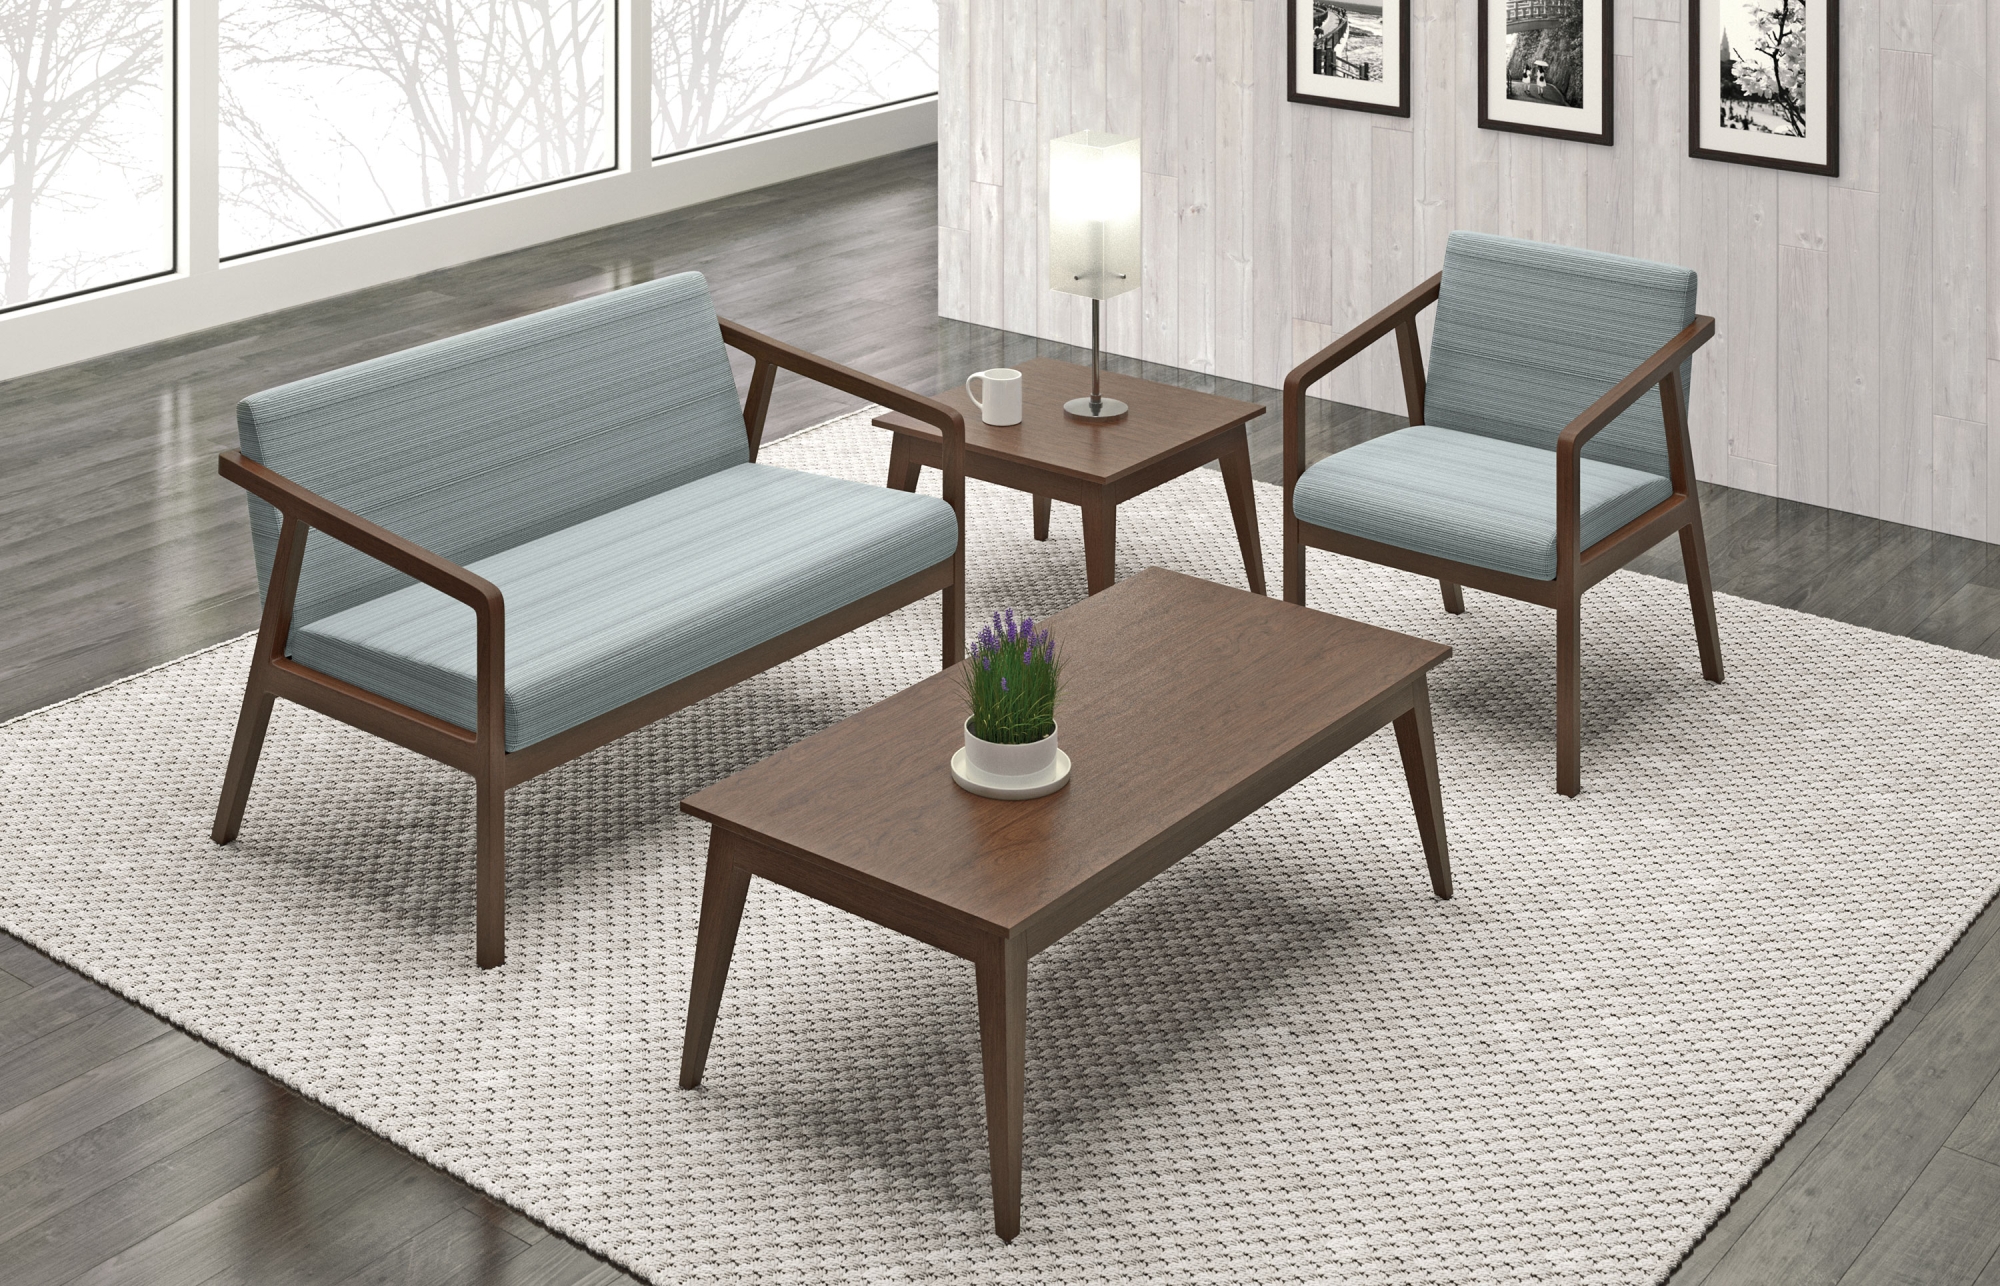 Indiana Furniture, Tables, The Britta Collection showcases a mid-century Scandinavian aesthetic with an appealing